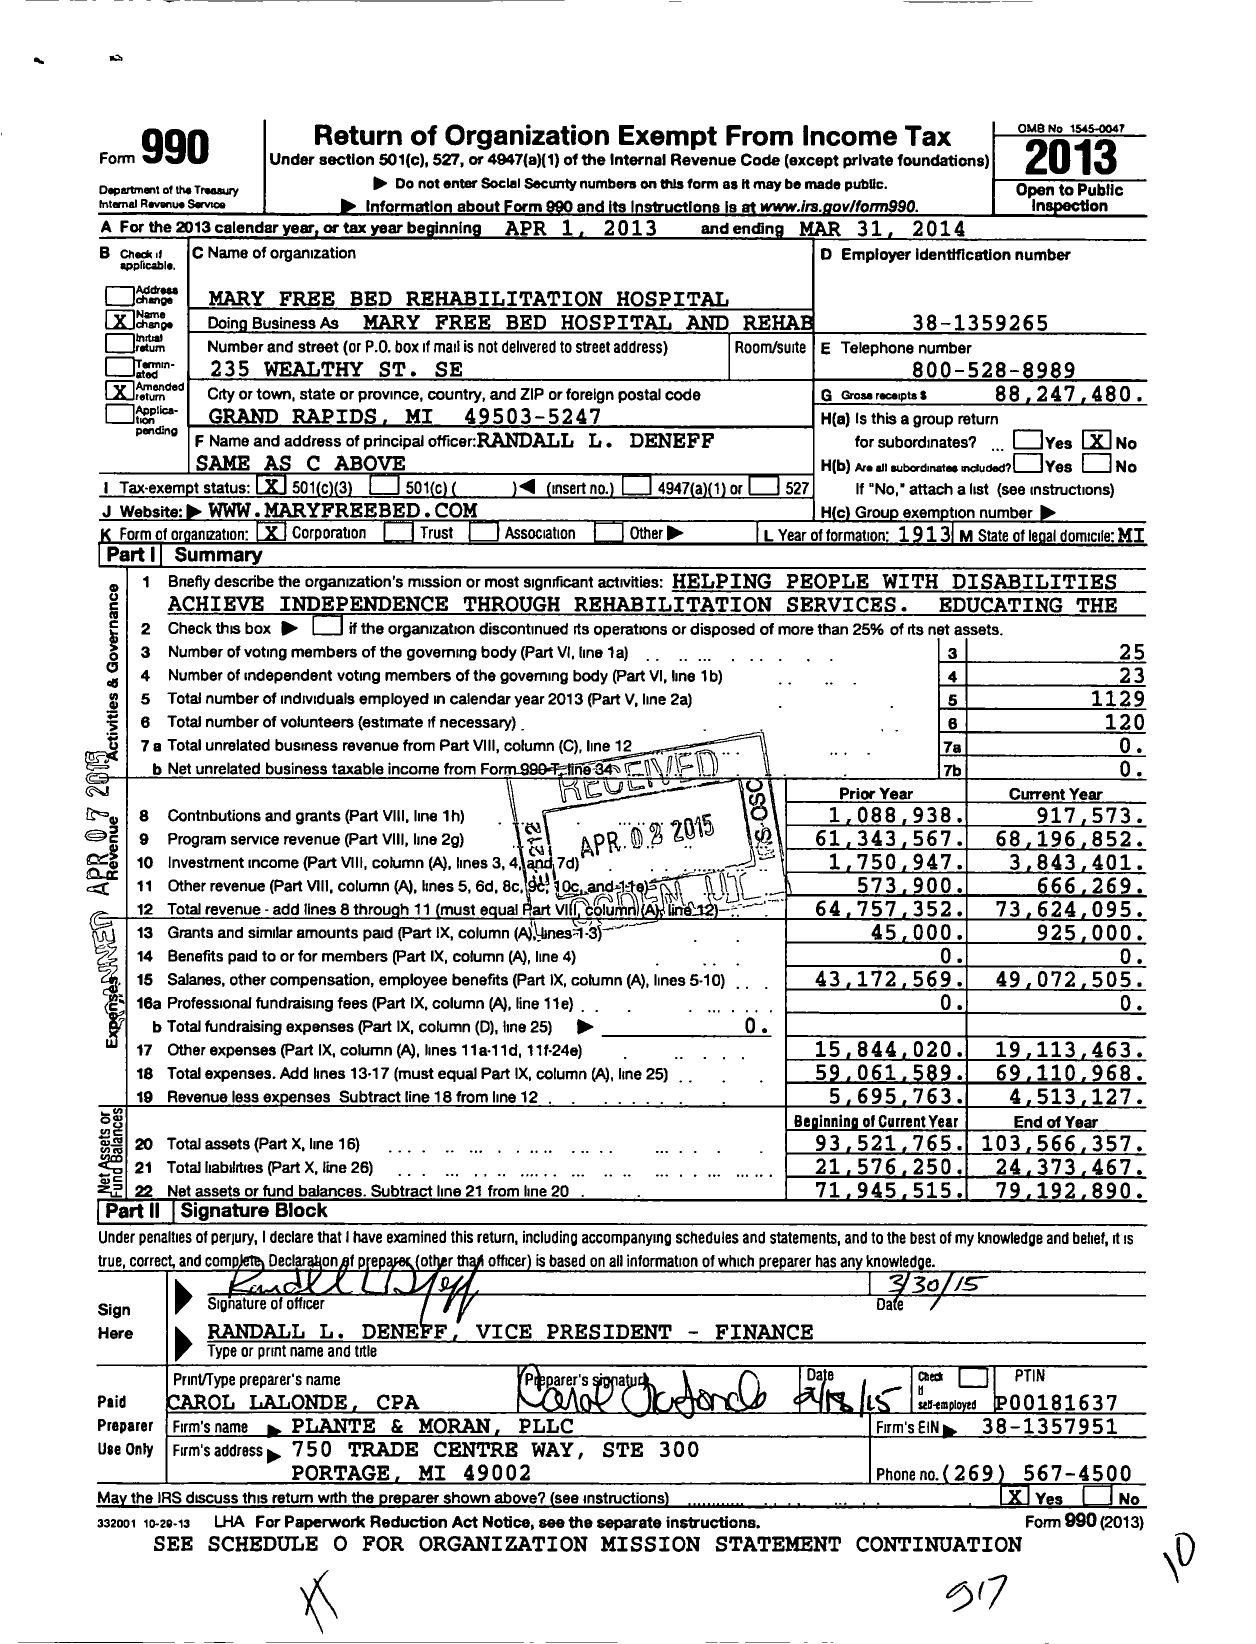 Image of first page of 2013 Form 990 for Mary Free Bed Hospital and Rehabilitation Center